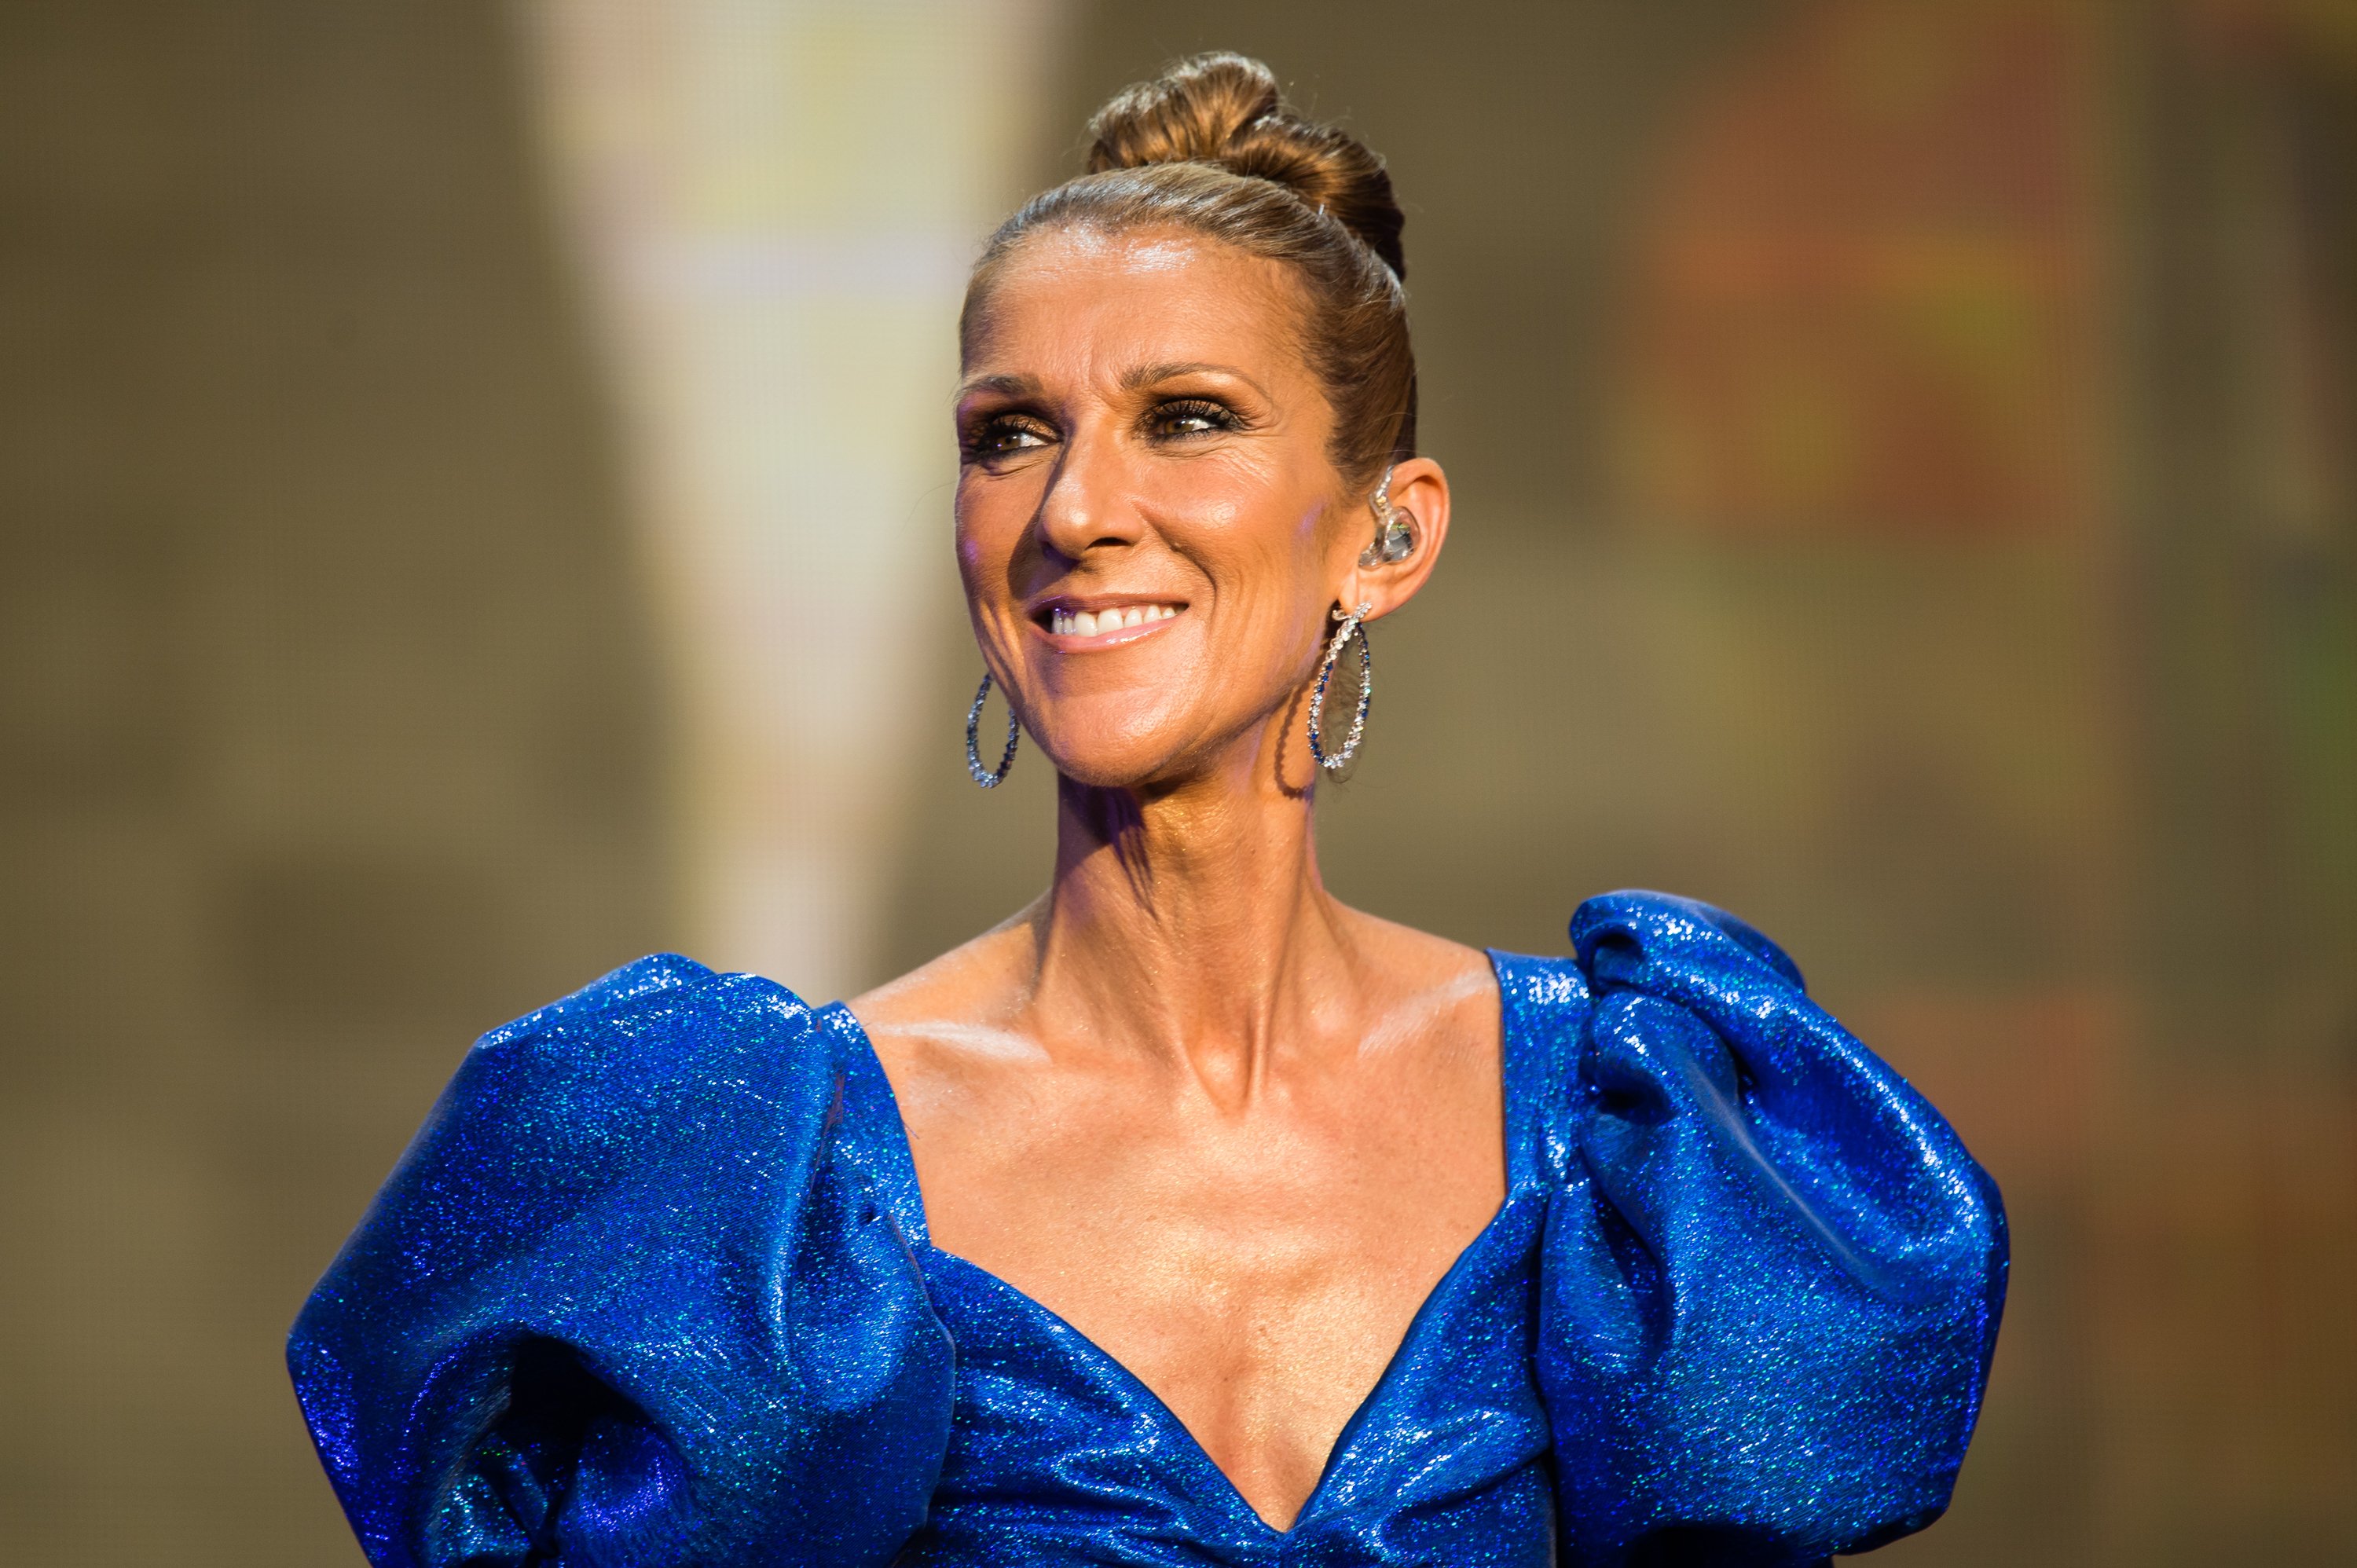  Celine Dion at Barclaycard Presents British Summer Time Hyde Park on July 05, 2019 in London, England | Photo: Getty Images